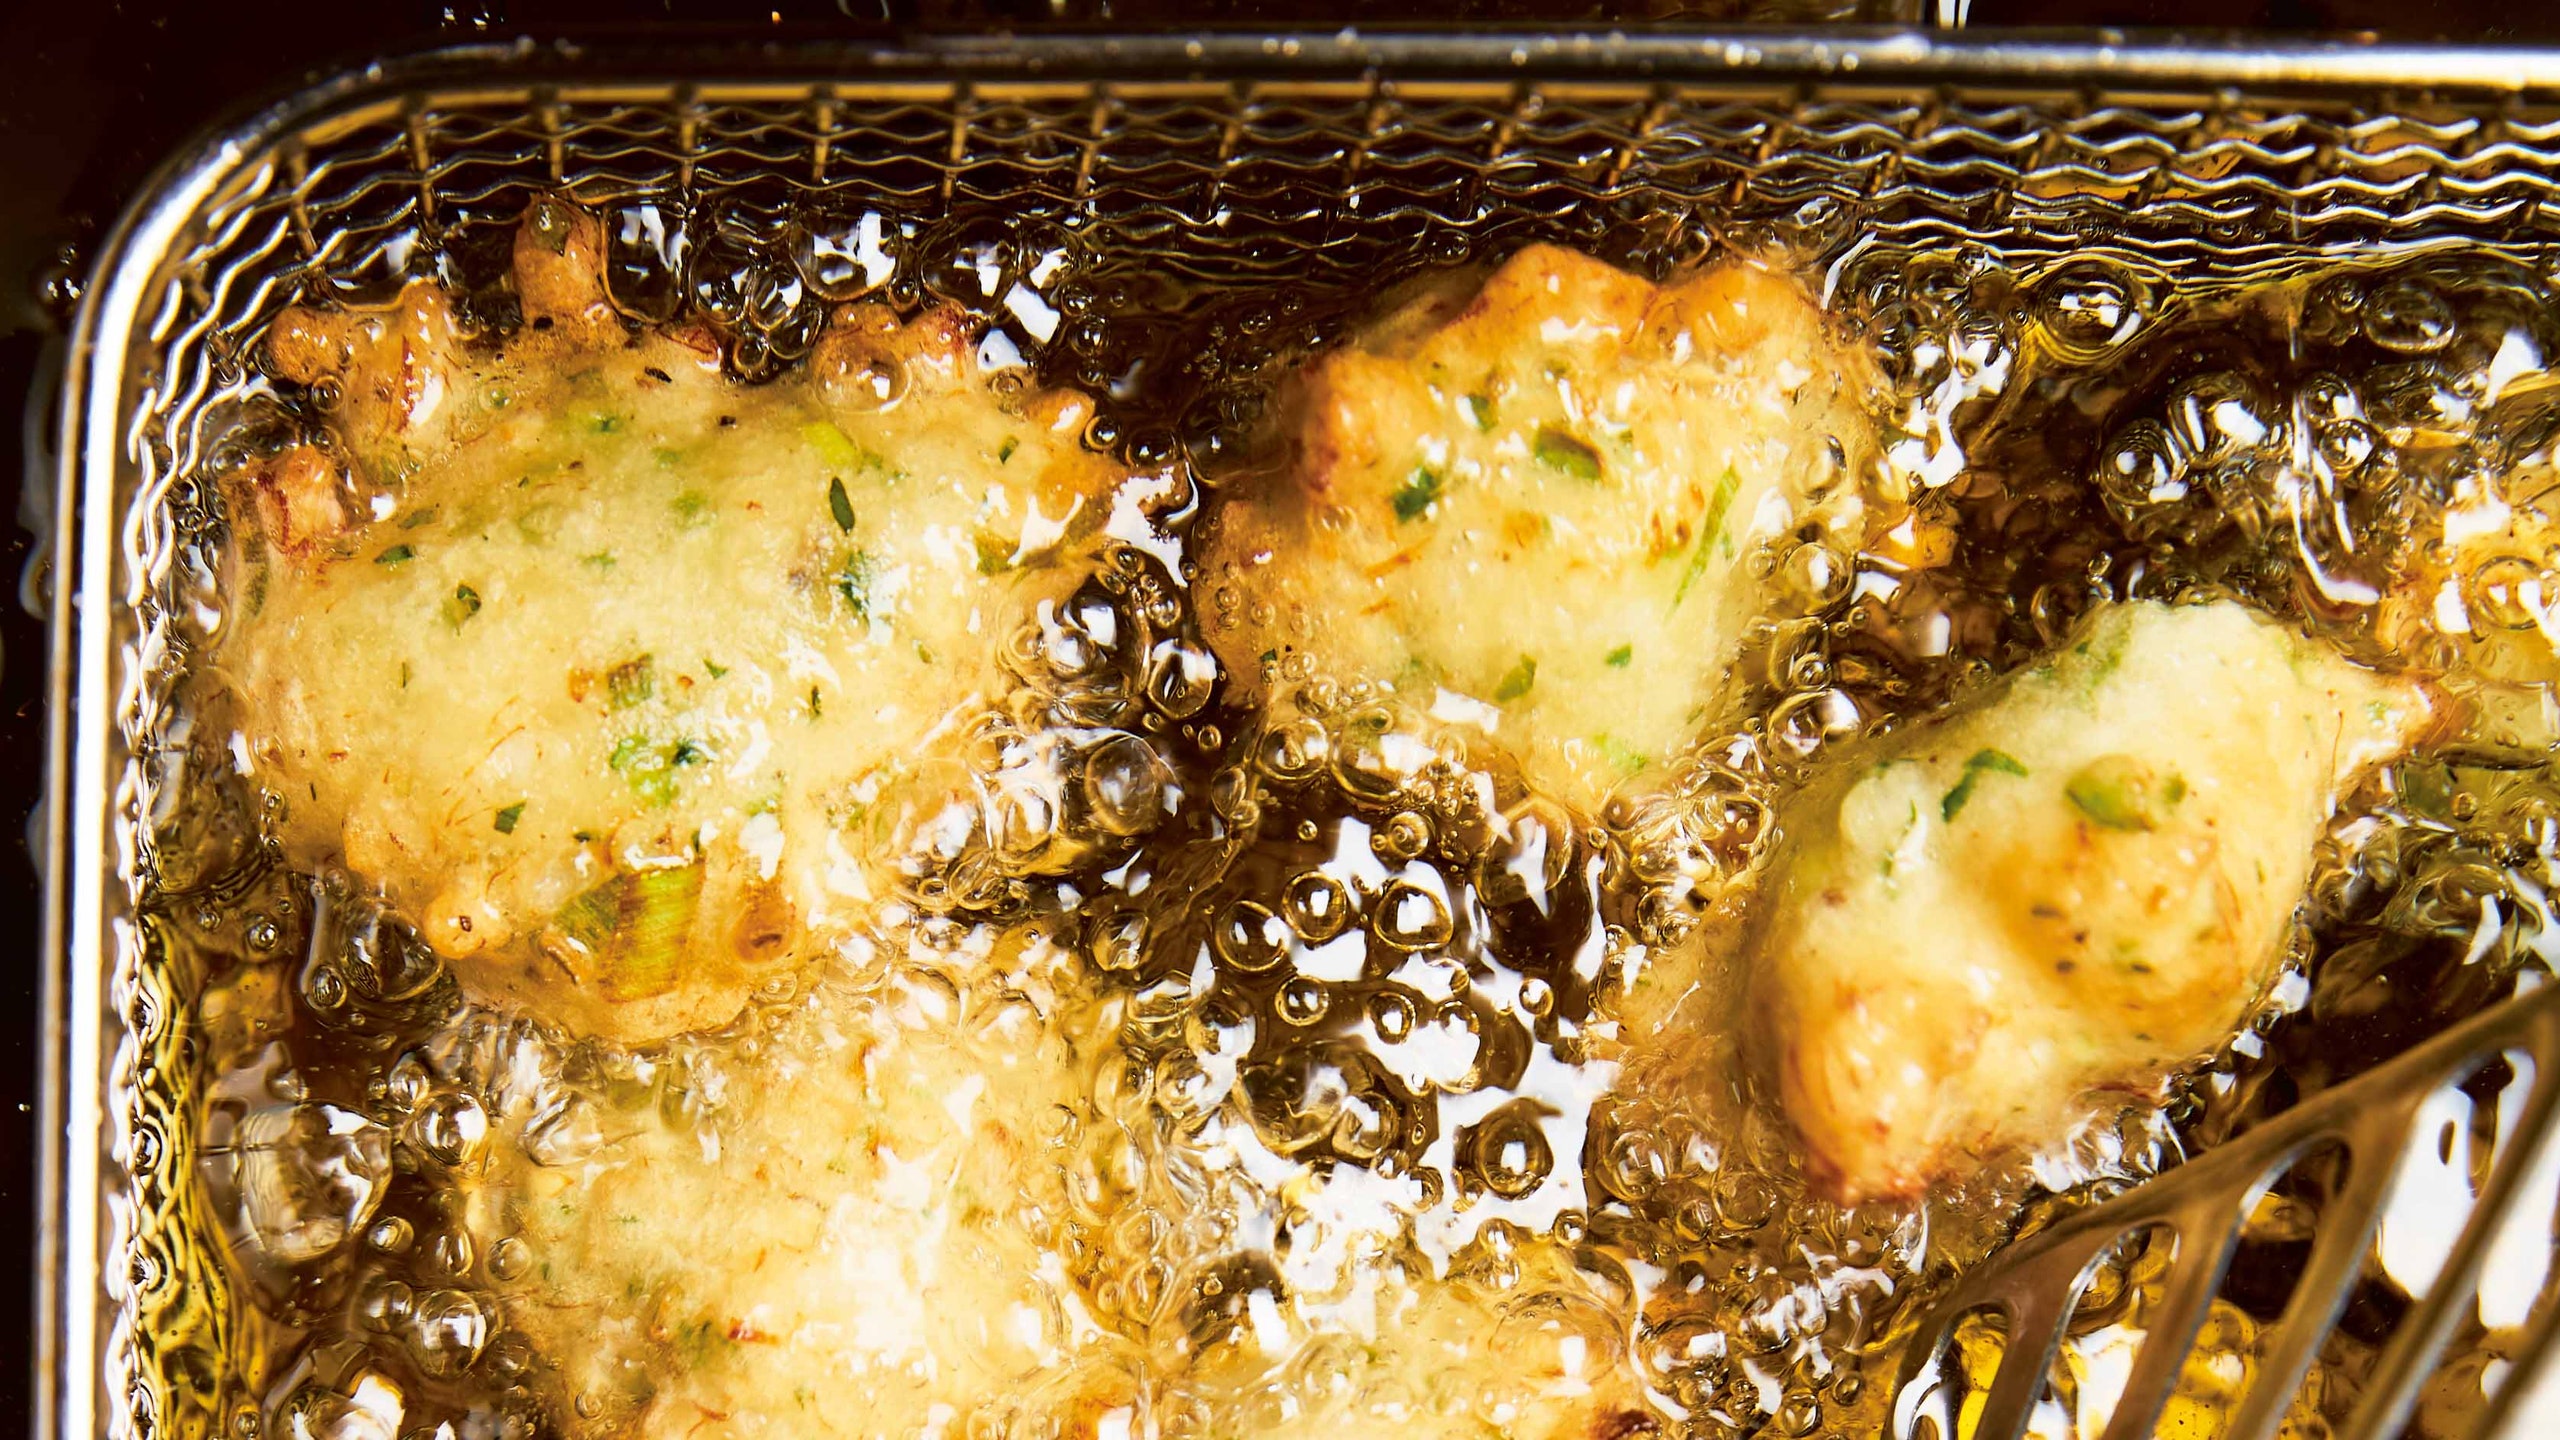 Salt cod fritters frying in a deep fryer with a fish spatula reaching in